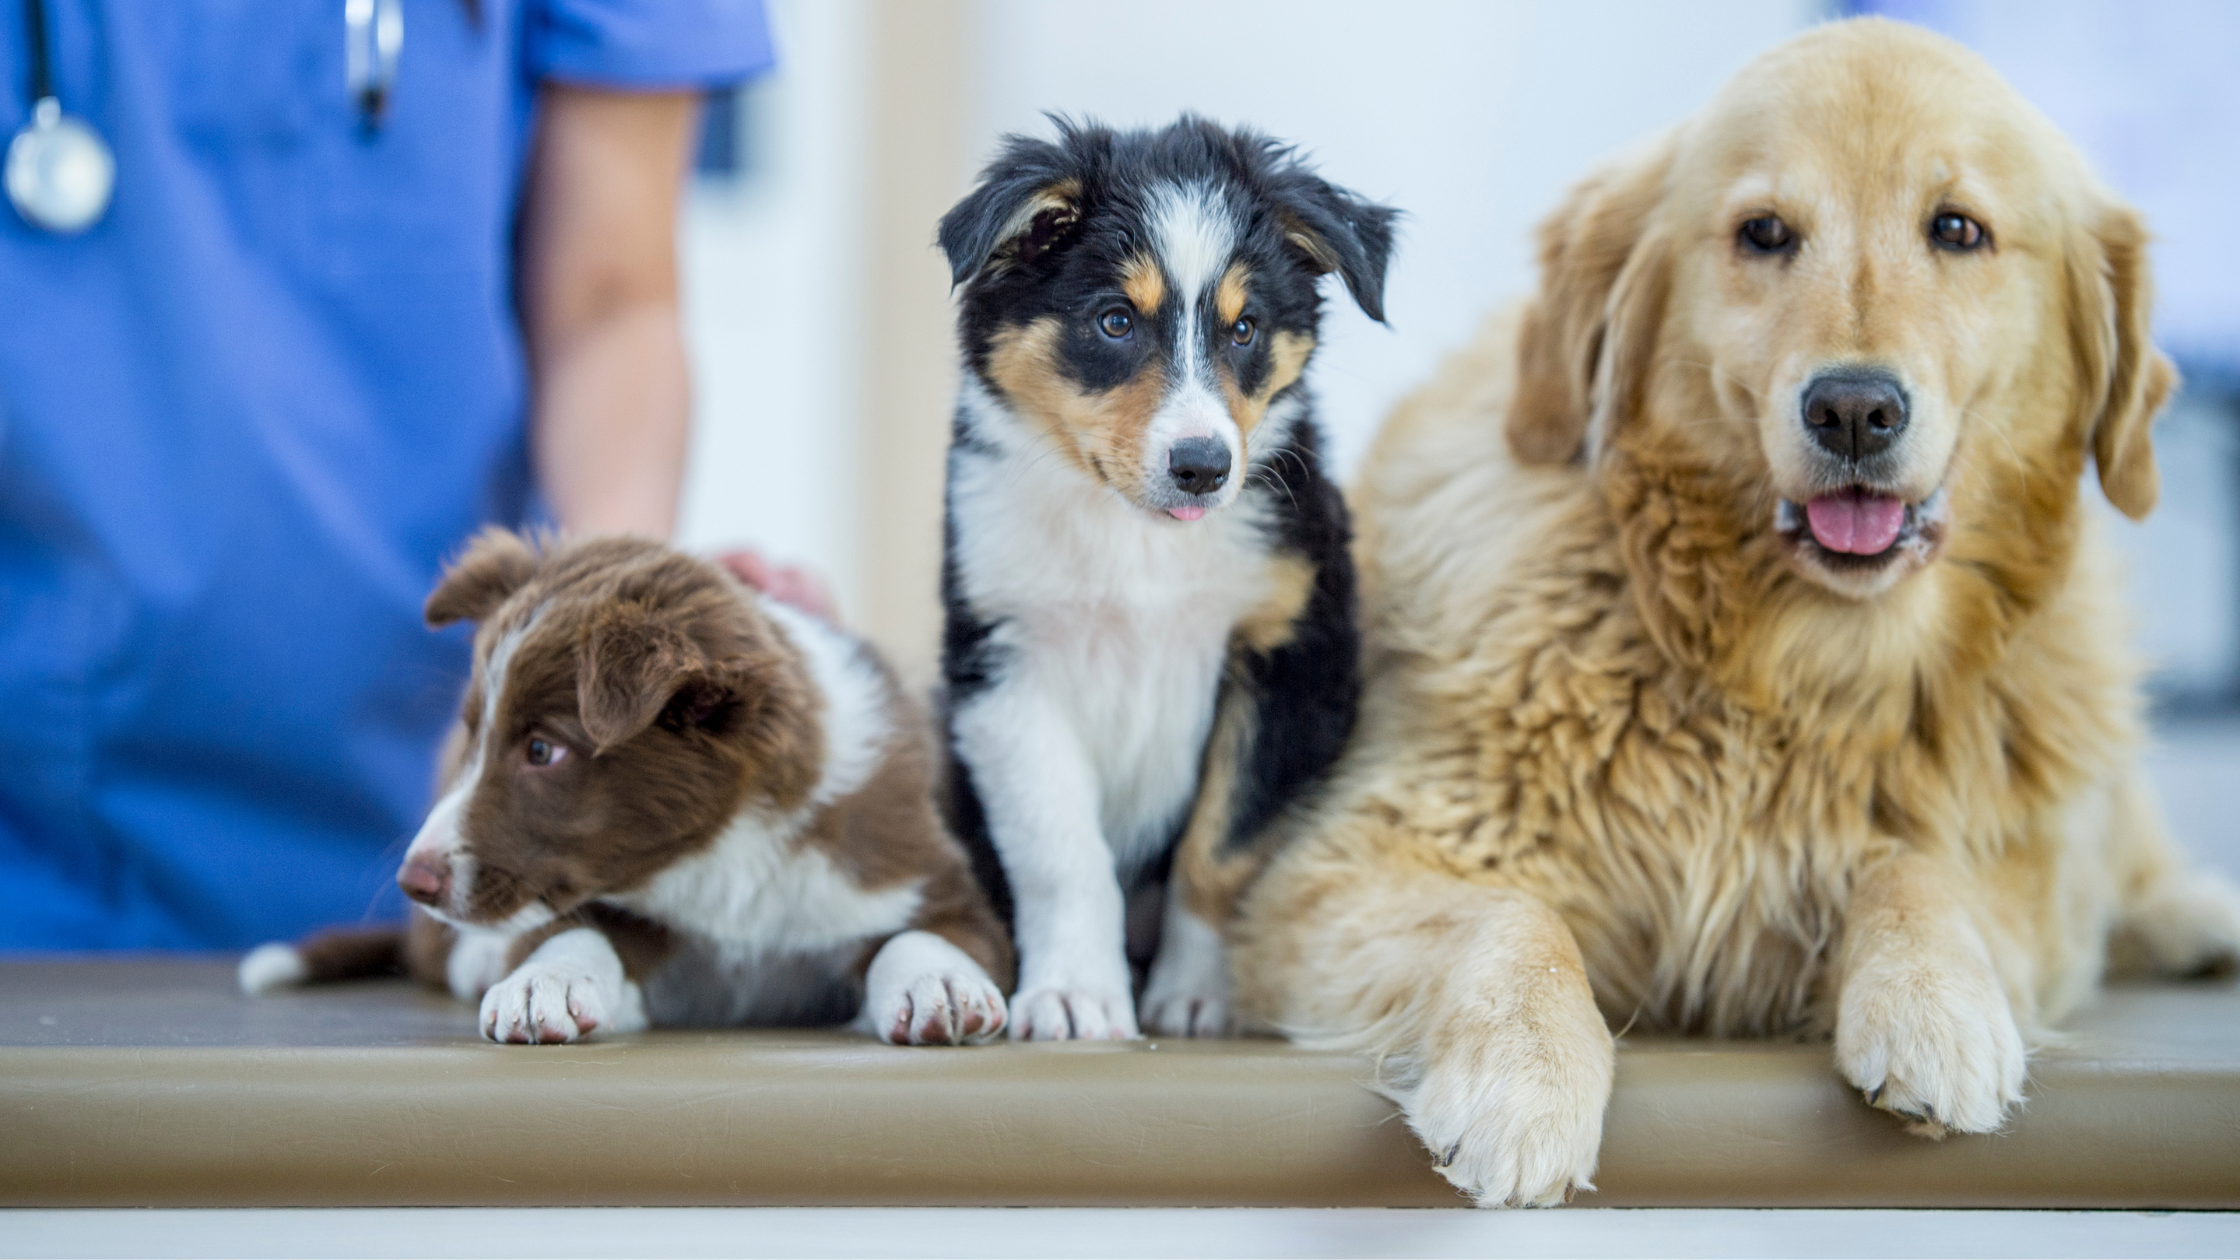 dogs waiting for a health check-up in a modern veterinary clinic in Germany.